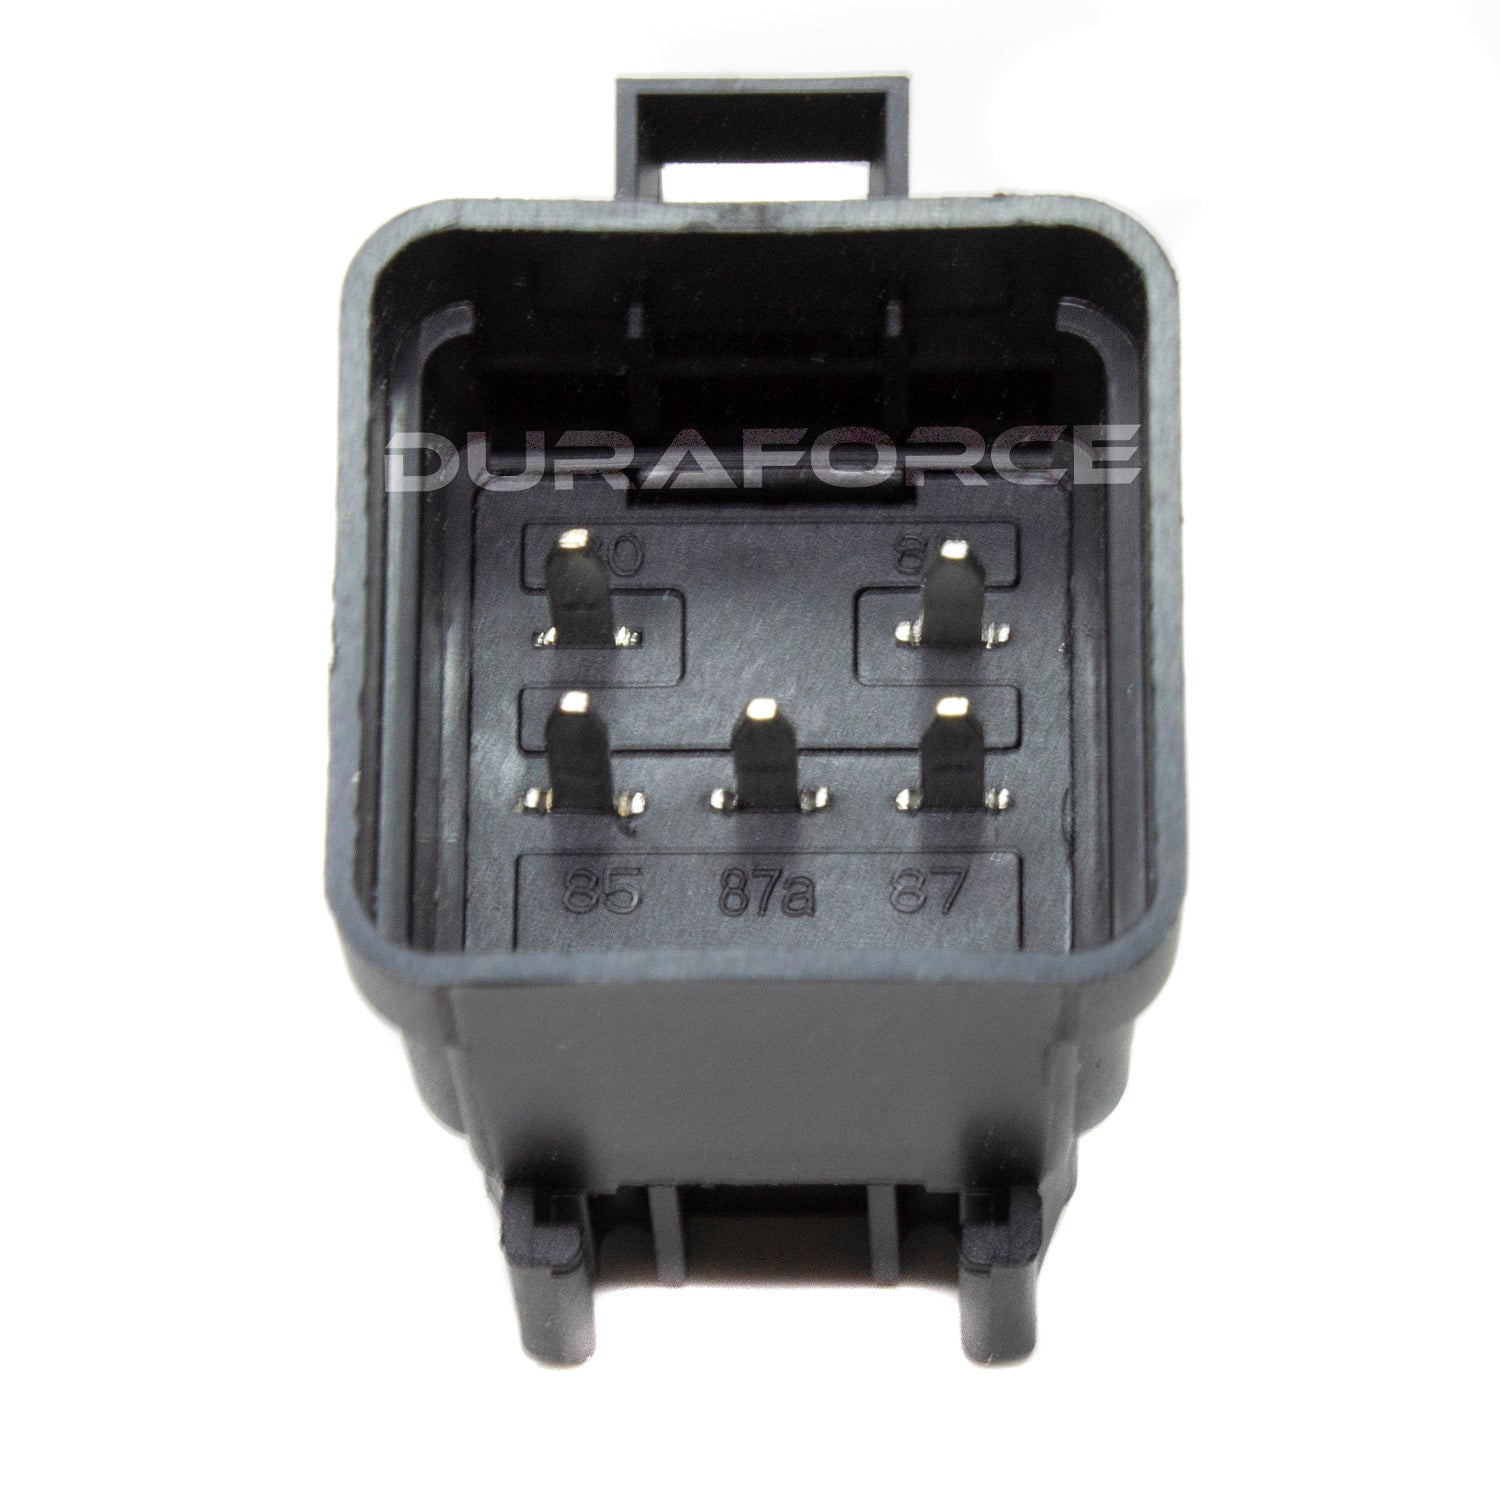 Duraforce 6670312, Magnetic Relay Switch For Bobcat